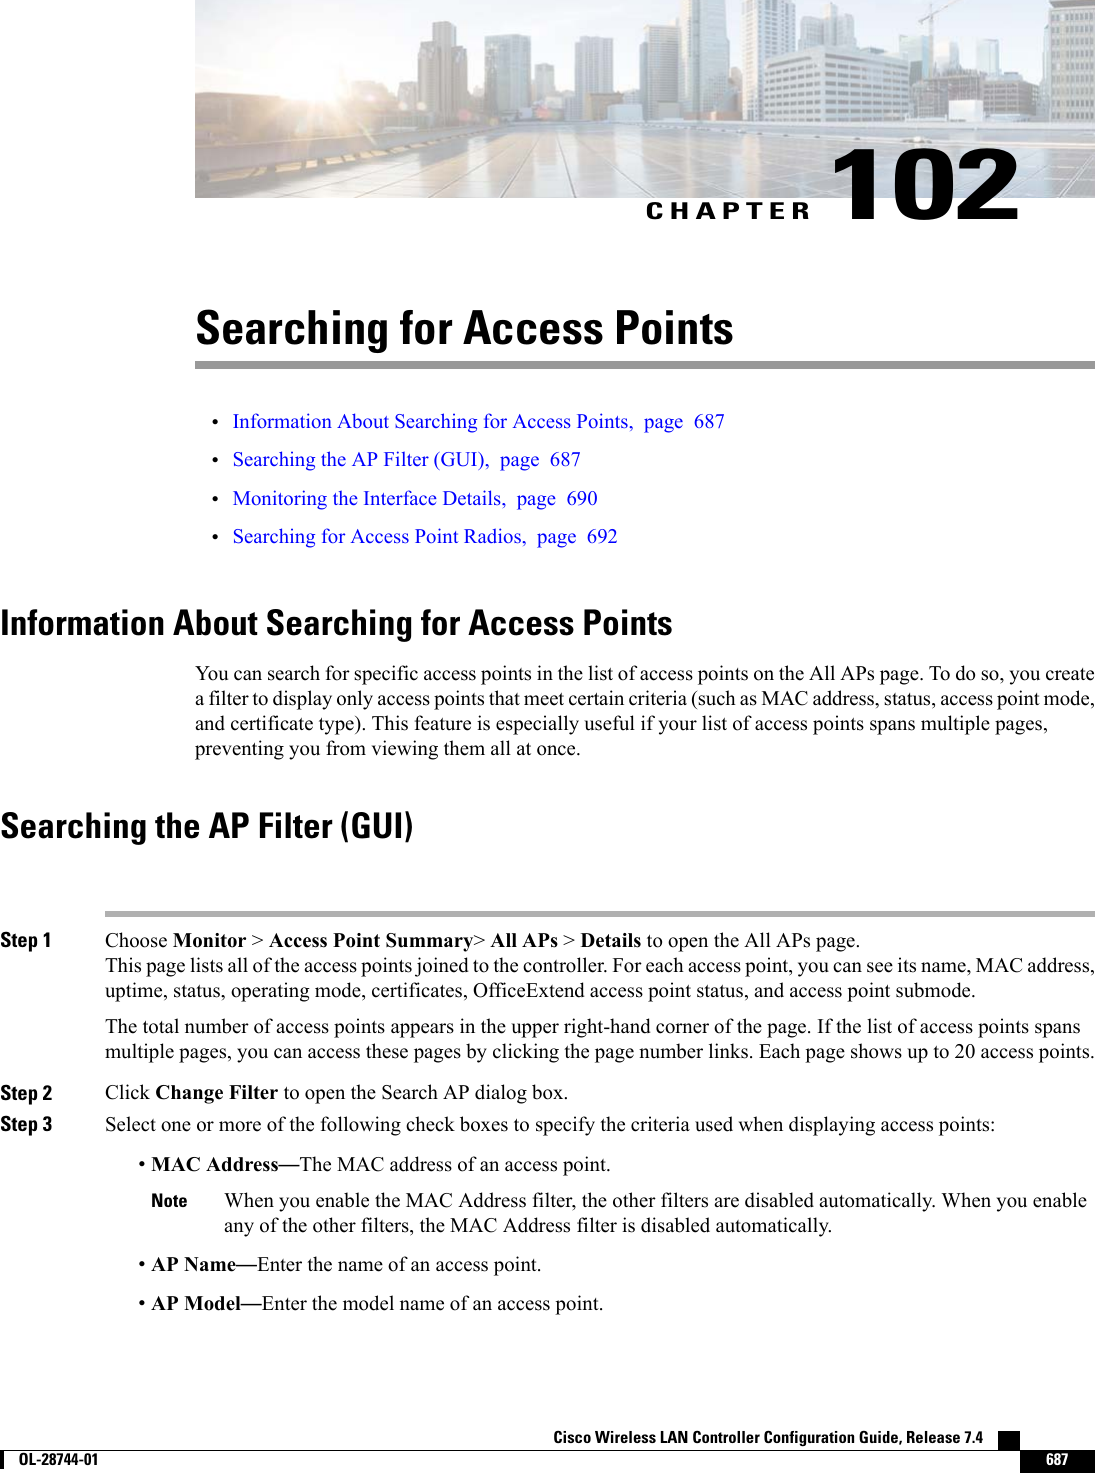 CHAPTER 102Searching for Access Points•Information About Searching for Access Points, page 687•Searching the AP Filter (GUI), page 687•Monitoring the Interface Details, page 690•Searching for Access Point Radios, page 692Information About Searching for Access PointsYou can search for specific access points in the list of access points on the All APs page. To do so, you createa filter to display only access points that meet certain criteria (such as MAC address, status, access point mode,and certificate type). This feature is especially useful if your list of access points spans multiple pages,preventing you from viewing them all at once.Searching the AP Filter (GUI)Step 1 Choose Monitor &gt;Access Point Summary&gt;All APs &gt;Details to open the All APs page.This page lists all of the access points joined to the controller. For each access point, you can see its name, MAC address,uptime, status, operating mode, certificates, OfficeExtend access point status, and access point submode.The total number of access points appears in the upper right-hand corner of the page. If the list of access points spansmultiple pages, you can access these pages by clicking the page number links. Each page shows up to 20 access points.Step 2 Click Change Filter to open the Search AP dialog box.Step 3 Select one or more of the following check boxes to specify the criteria used when displaying access points:•MAC Address—The MAC address of an access point.When you enable the MAC Address filter, the other filters are disabled automatically. When you enableany of the other filters, the MAC Address filter is disabled automatically.Note•AP Name—Enter the name of an access point.•AP Model—Enter the model name of an access point.Cisco Wireless LAN Controller Configuration Guide, Release 7.4        OL-28744-01 687